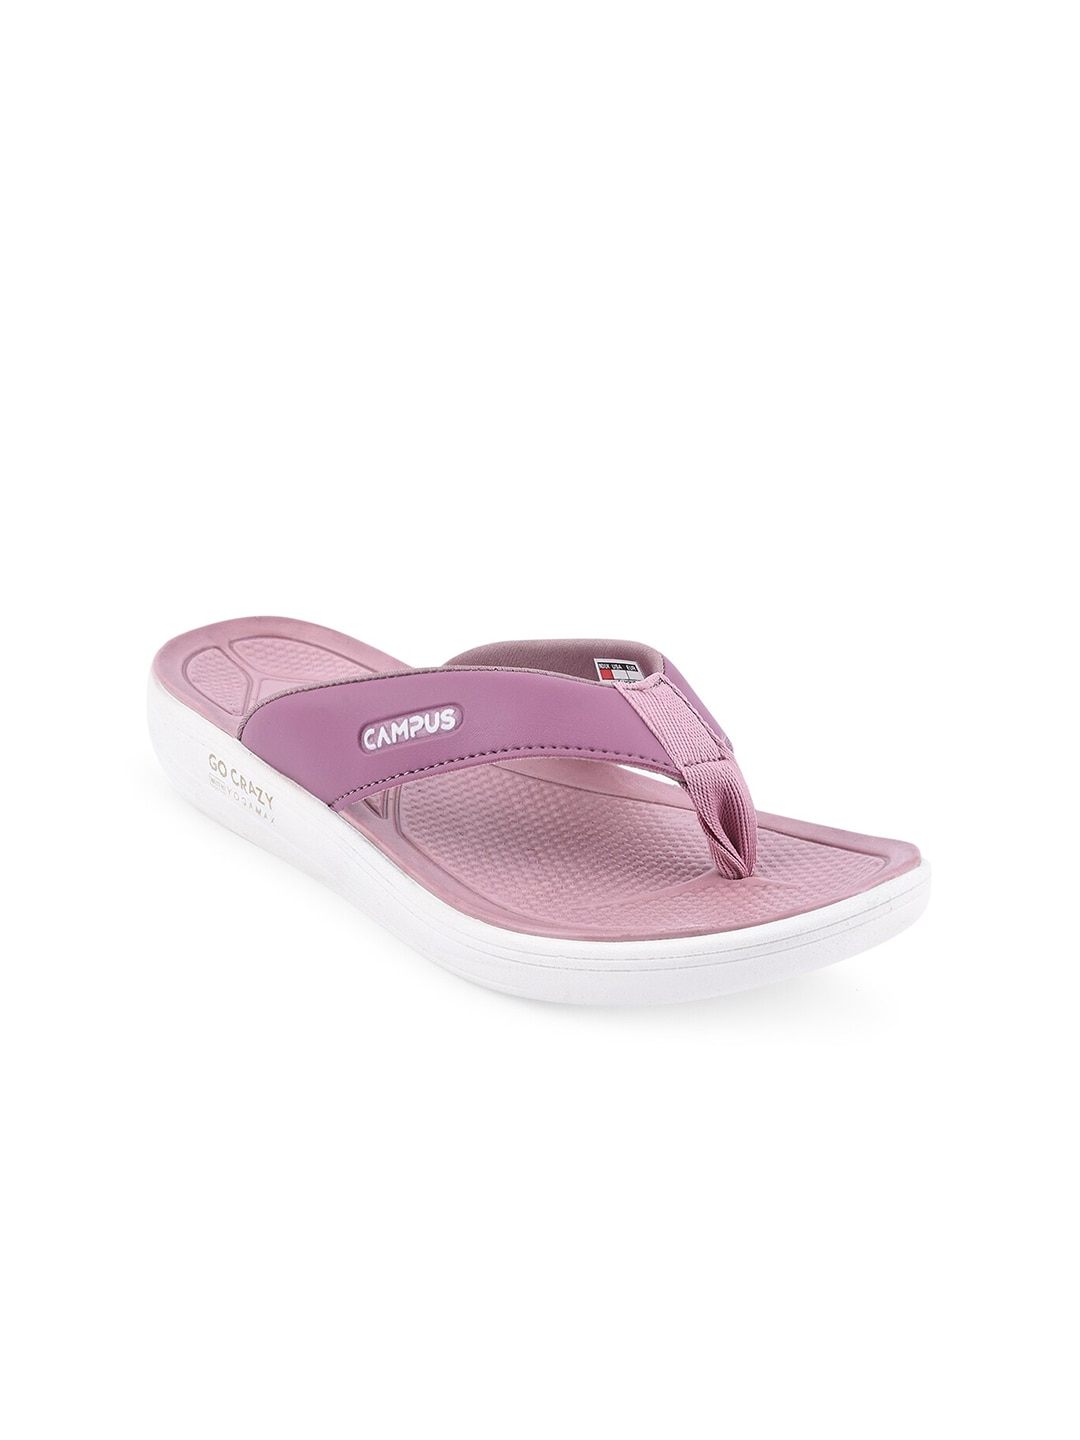 Campus Women Purple & White Rubber Thong Flip-Flops Price in India